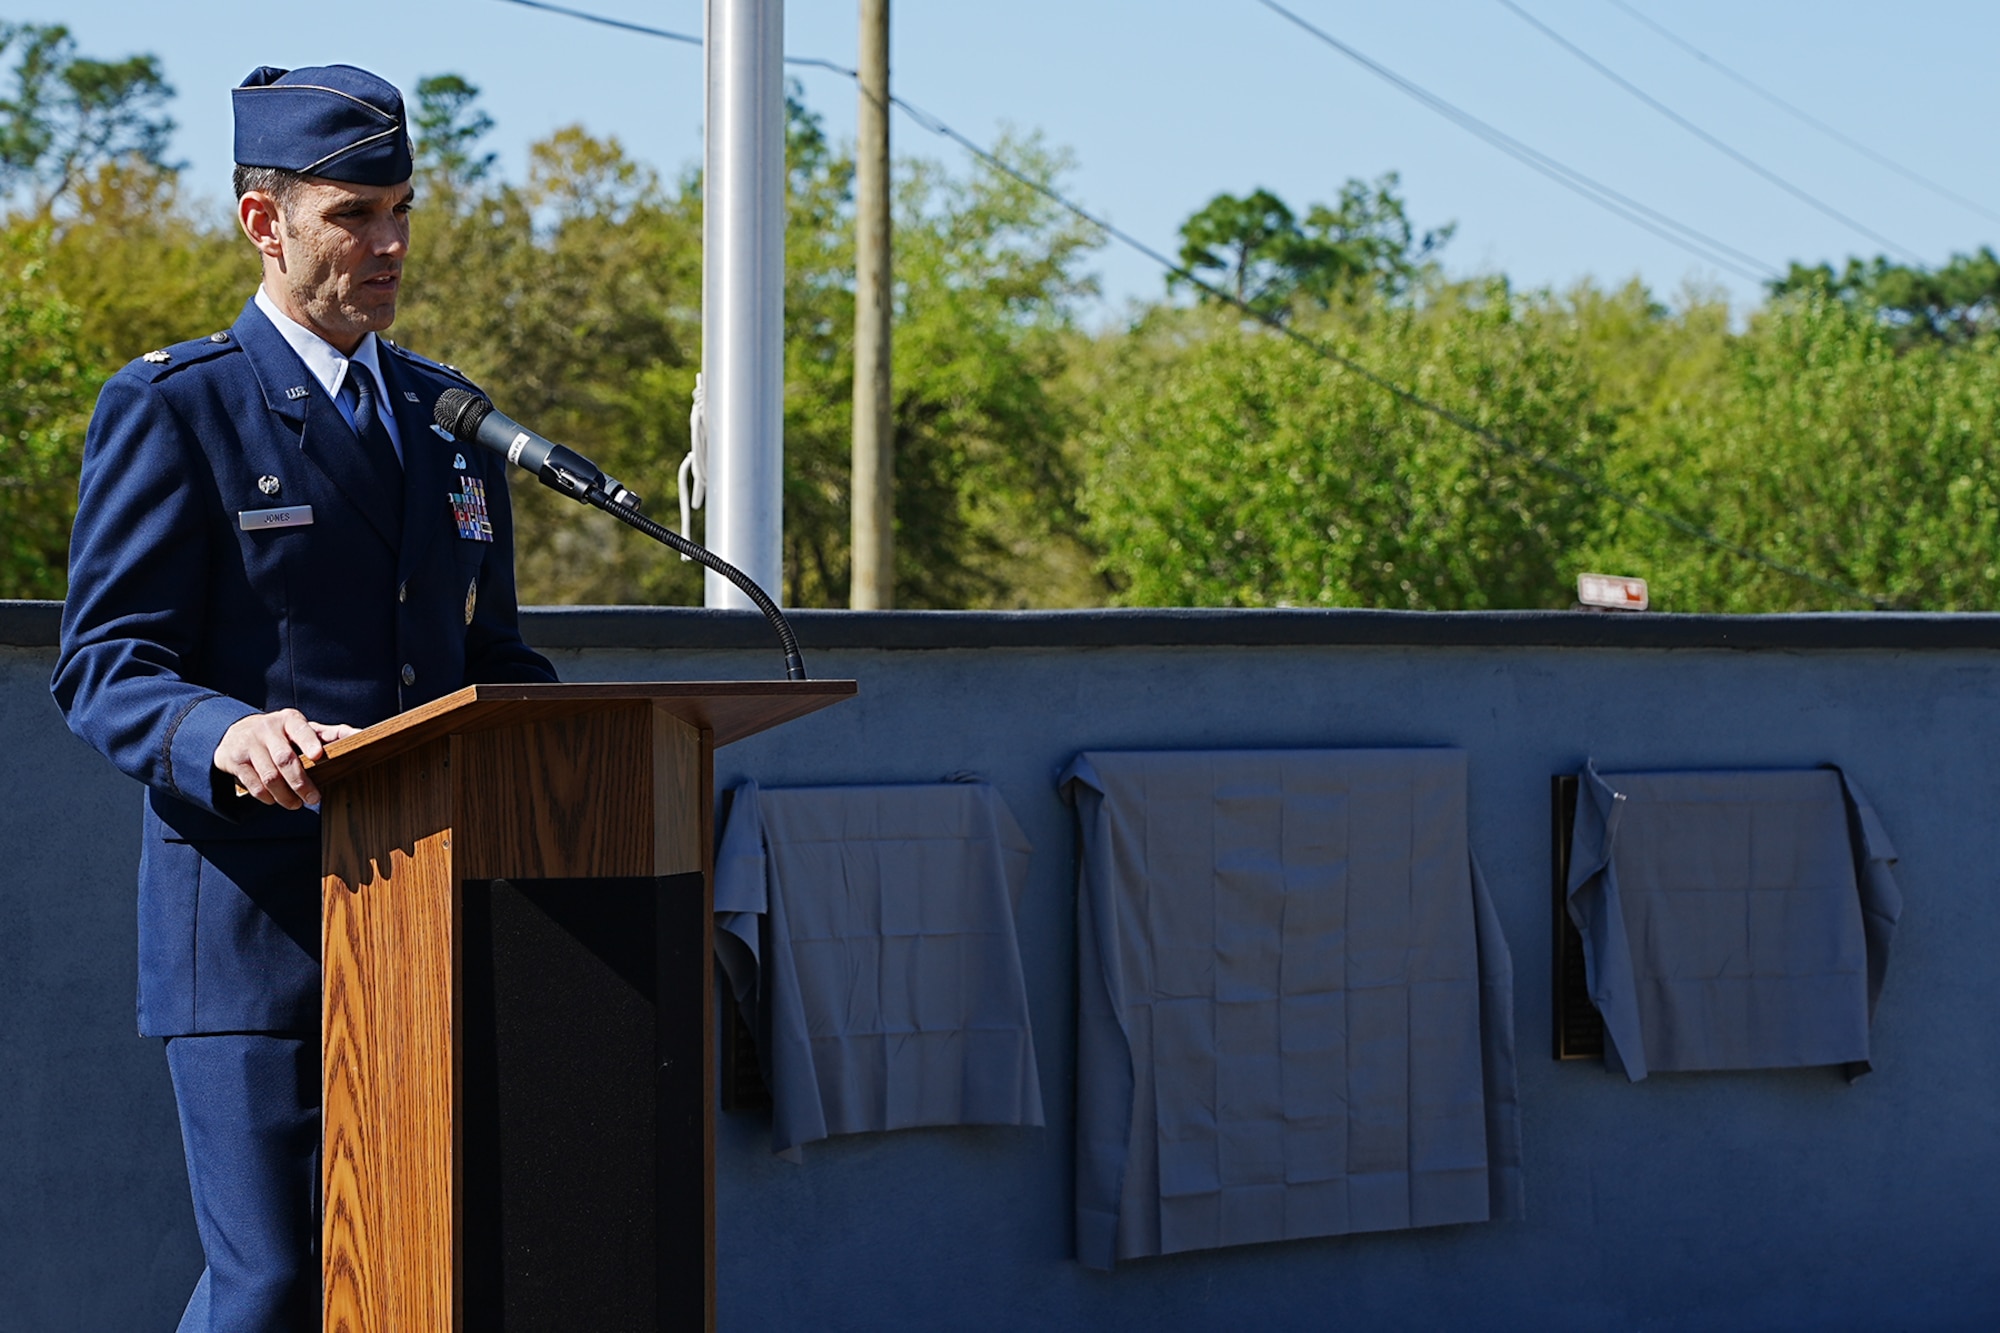 A keynote speaker talks at the podium outside for a memorial dedication.